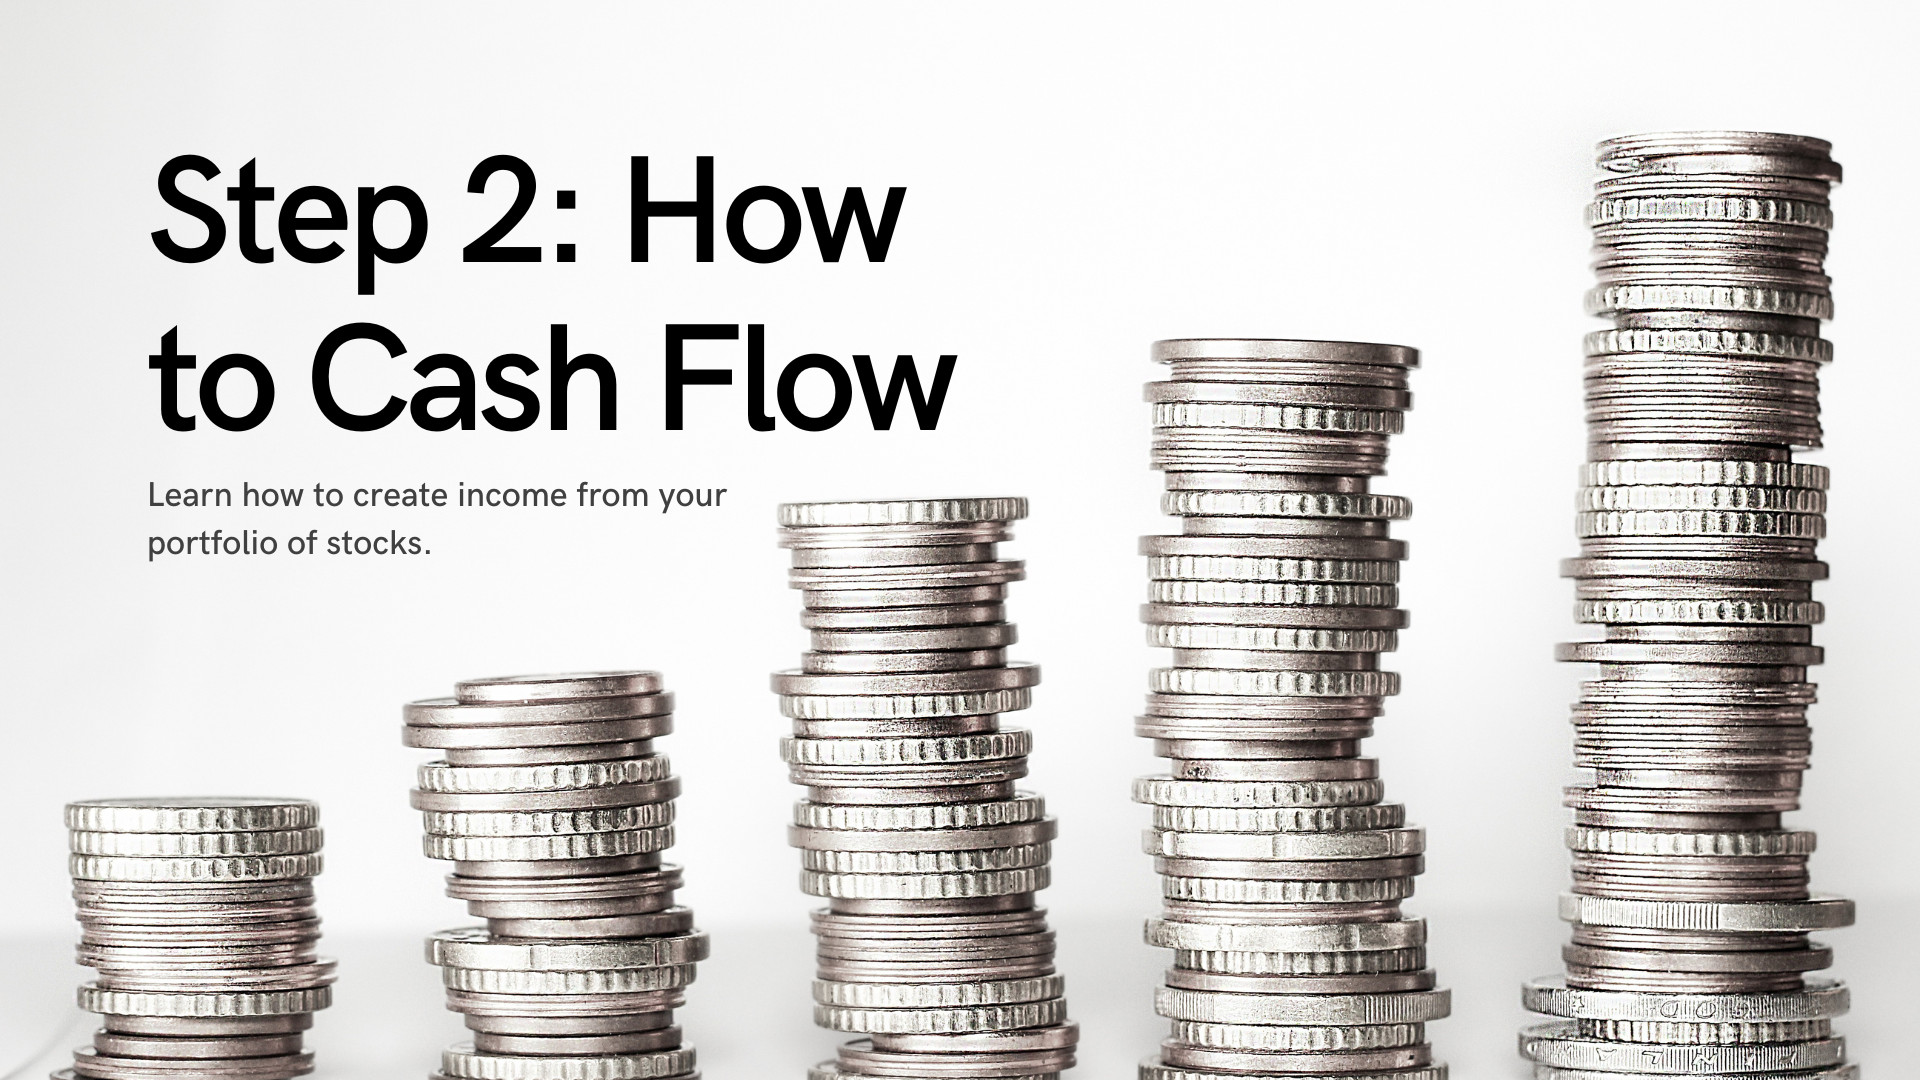 Step 2: How to Cash Flow. Learn how to create income from your portfolio of stocks.